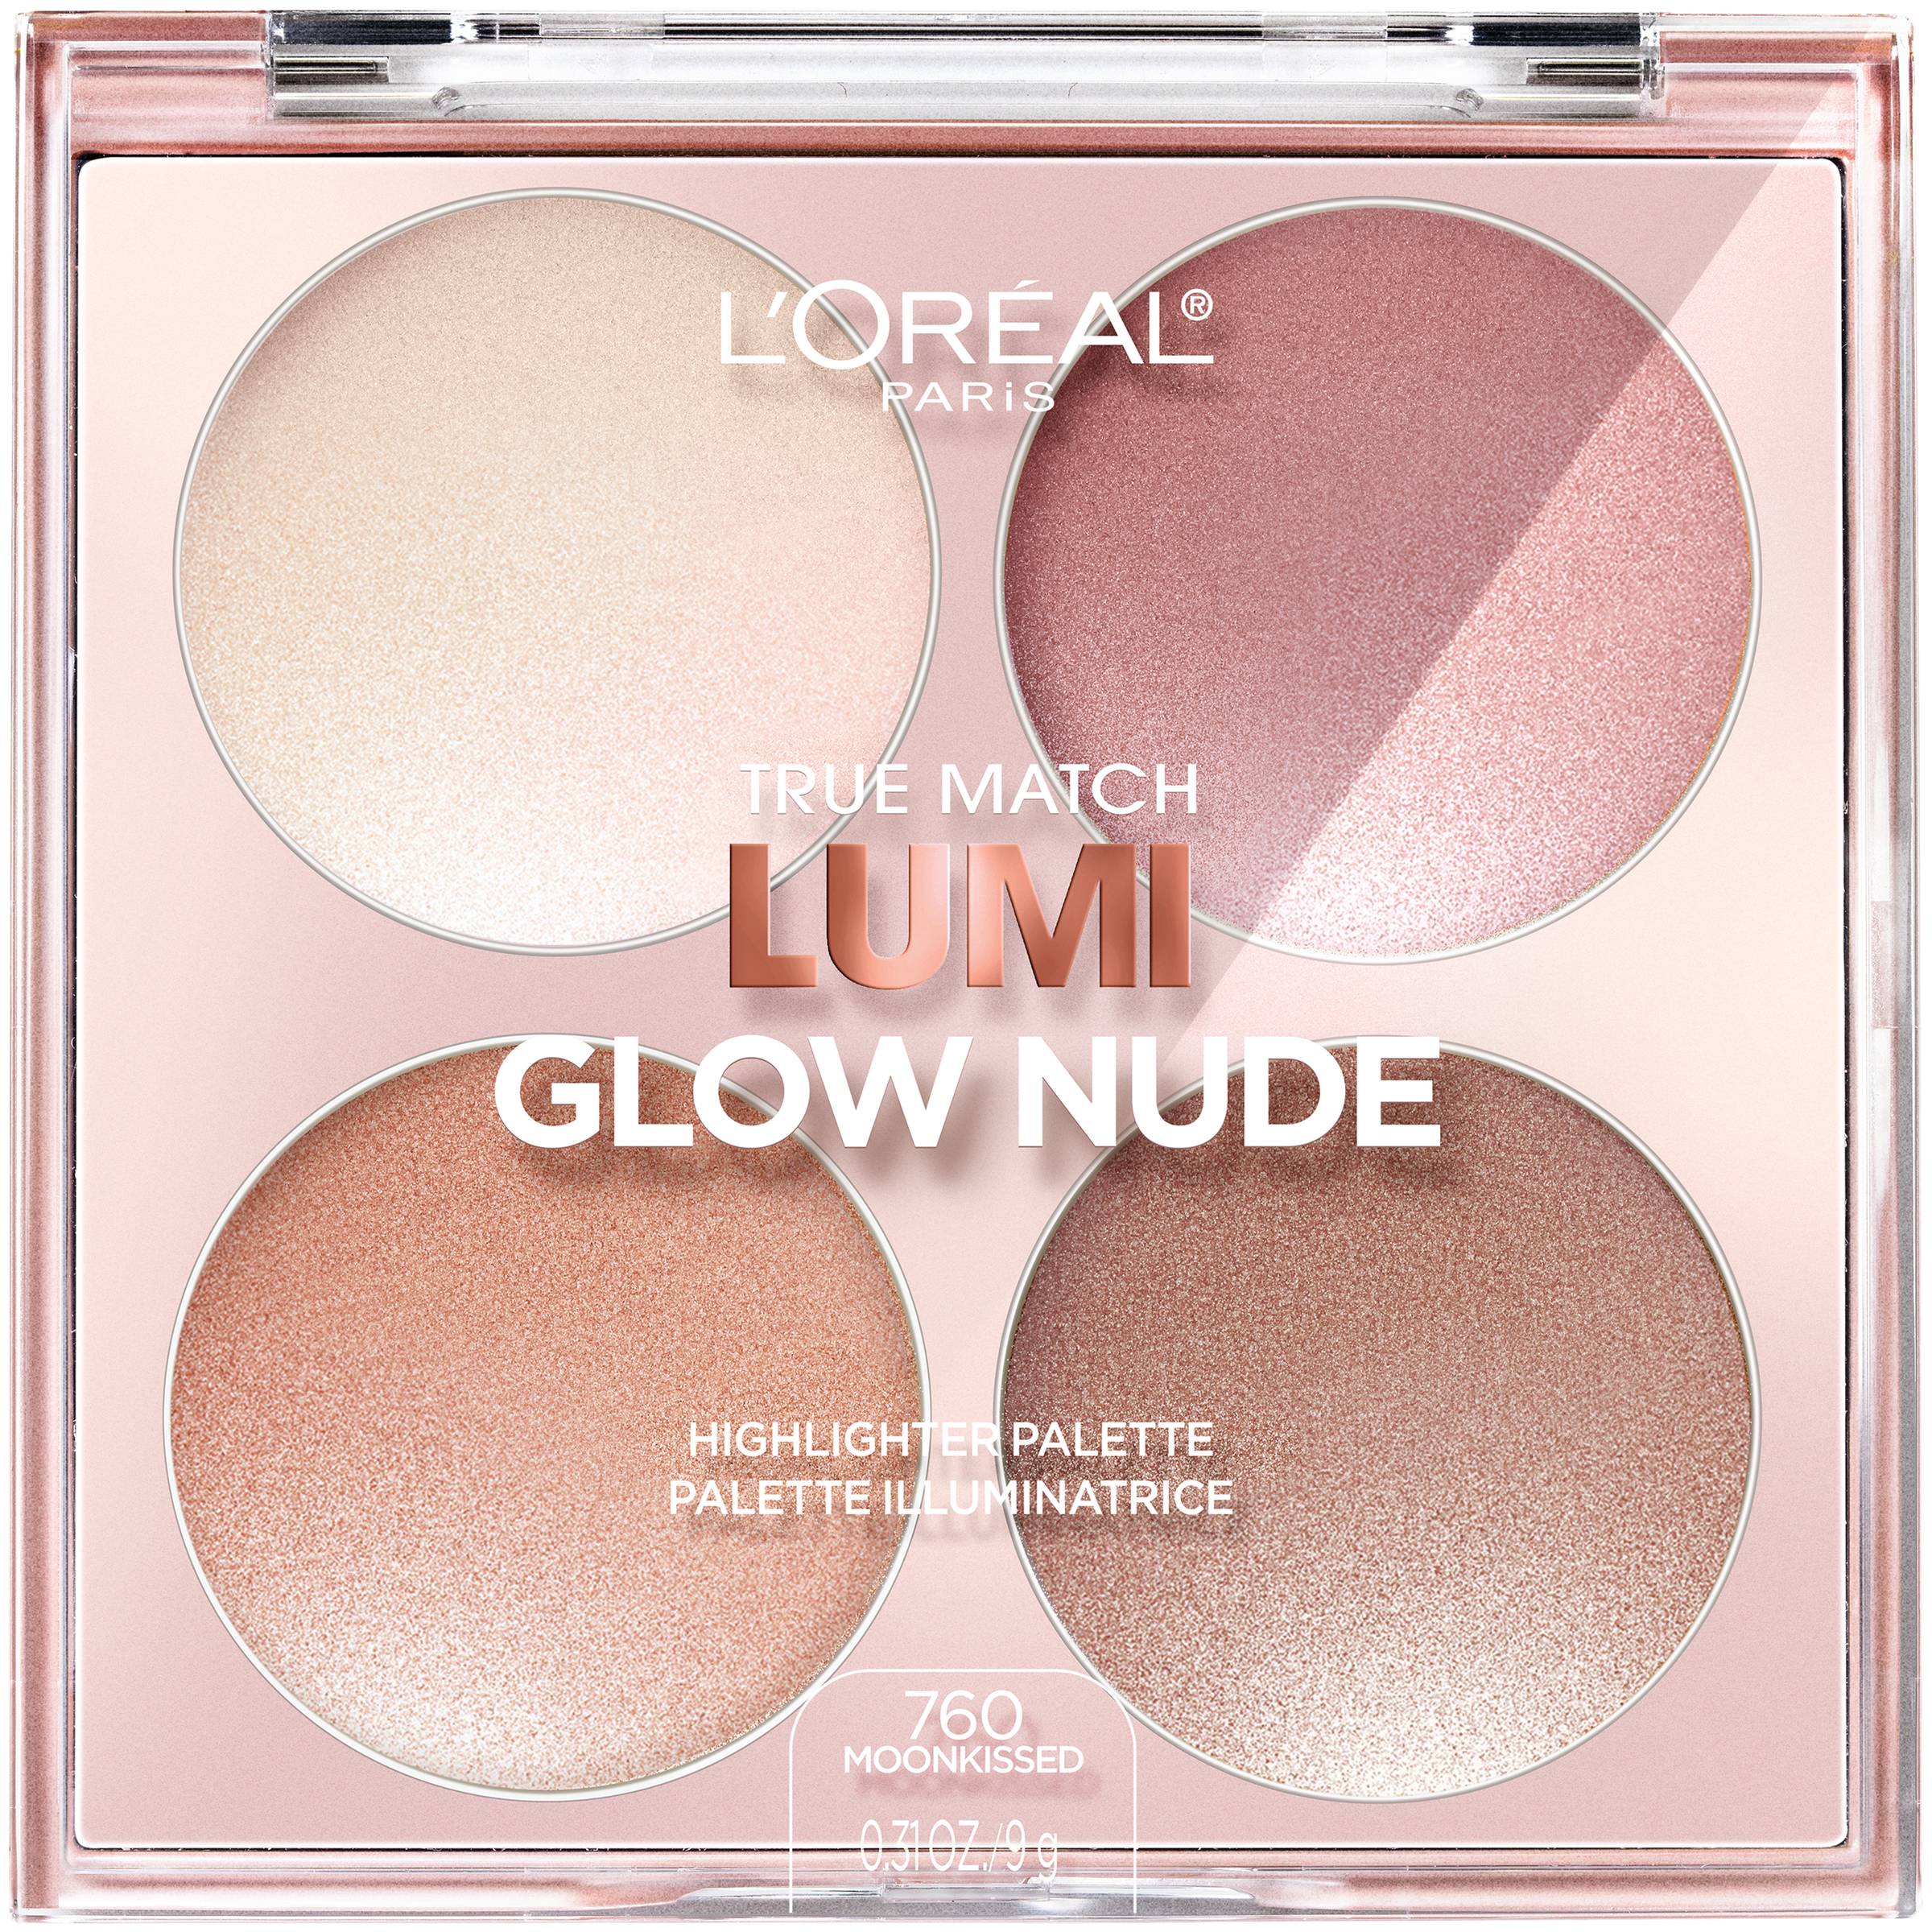 L'Oreal Paris True Match Lumi Glow Nude Highlighter Palette, Moonkissed, 0.26 oz - image 1 of 5